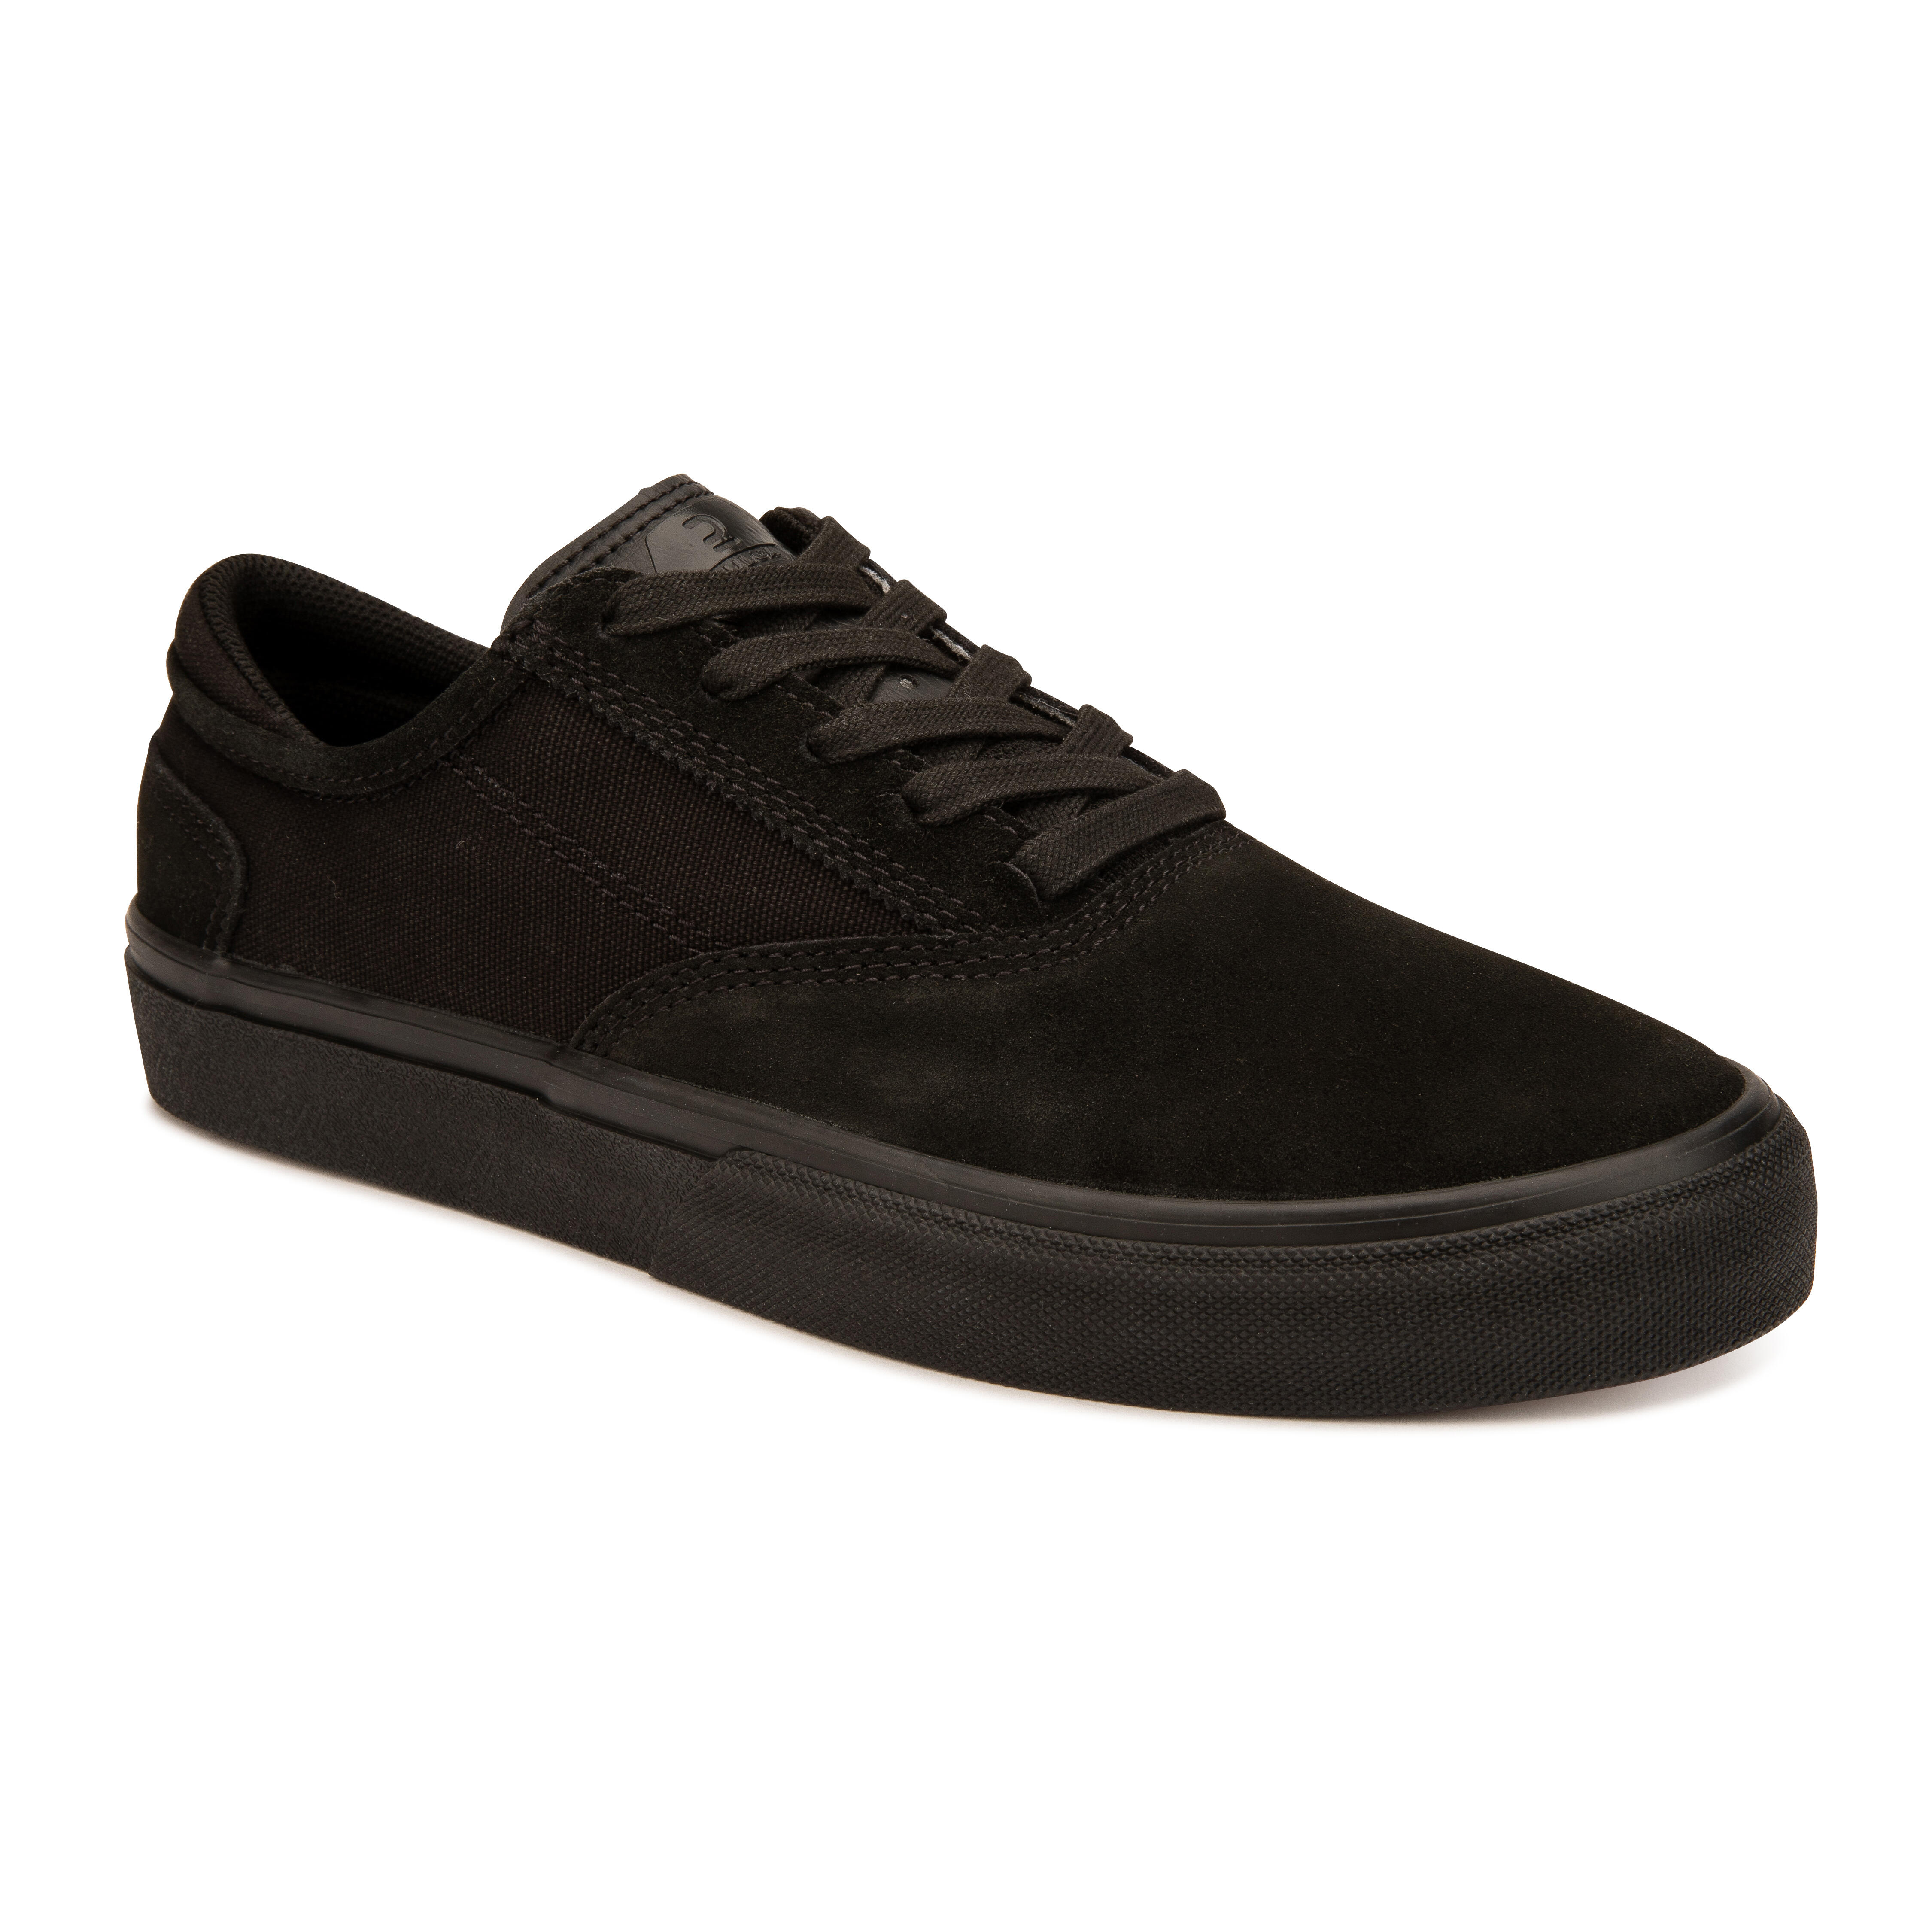 Airwalk The One Suede TRI Mens Gray Suede Lace Up Athletic Surf Skate Shoes